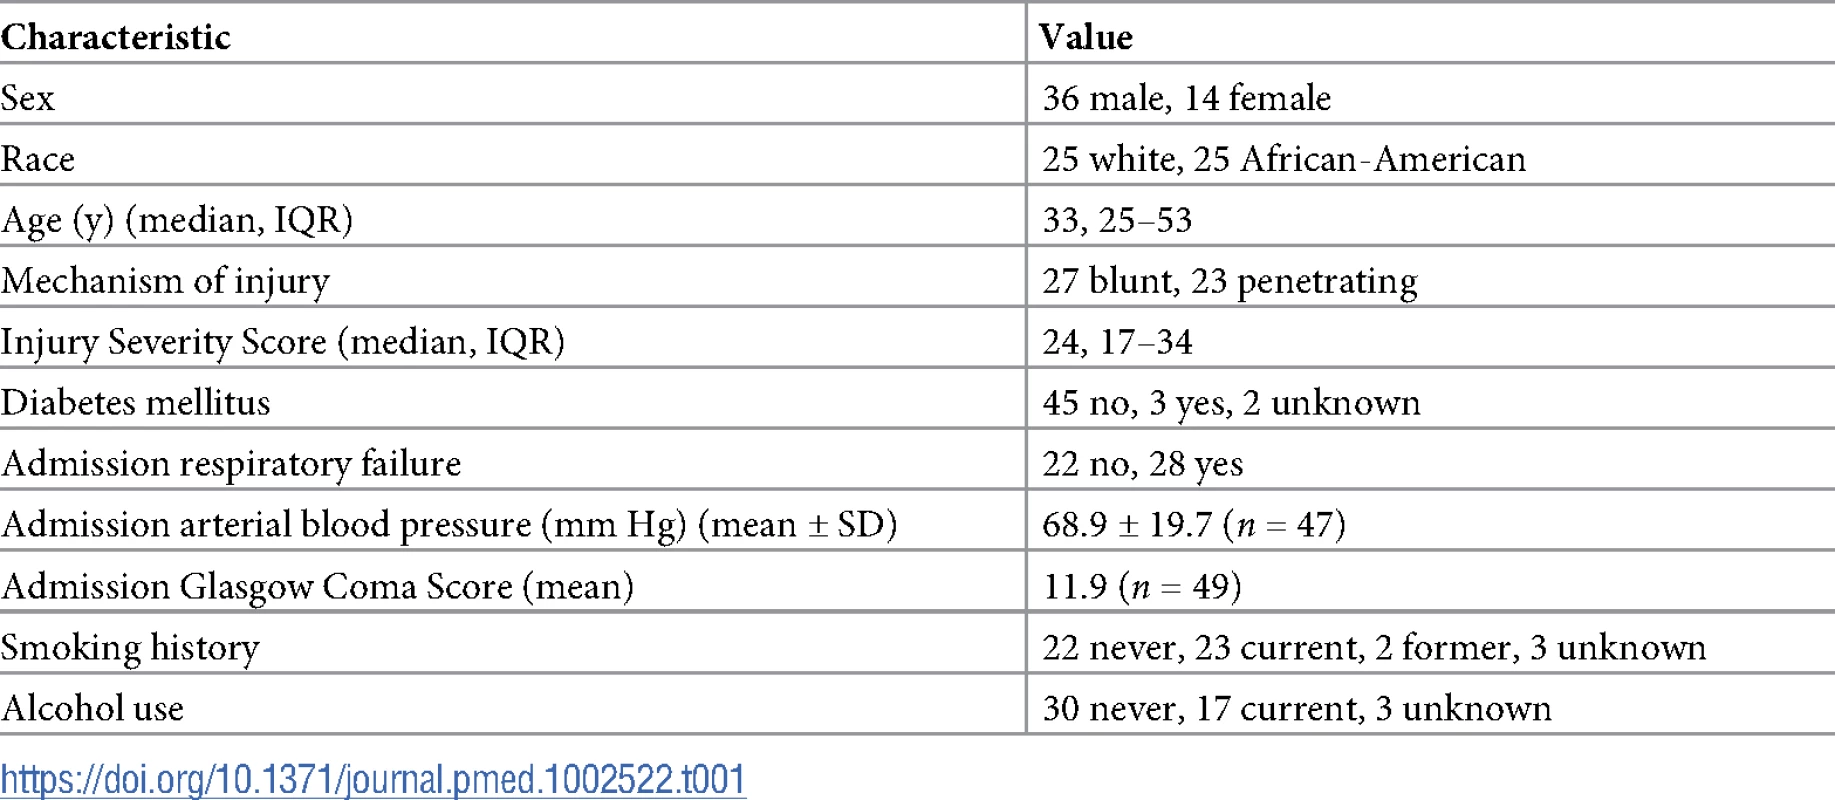 Trauma hemorrhage patient demographics at admission (&lt;i&gt;n =&lt;/i&gt; 50 unless otherwise noted).